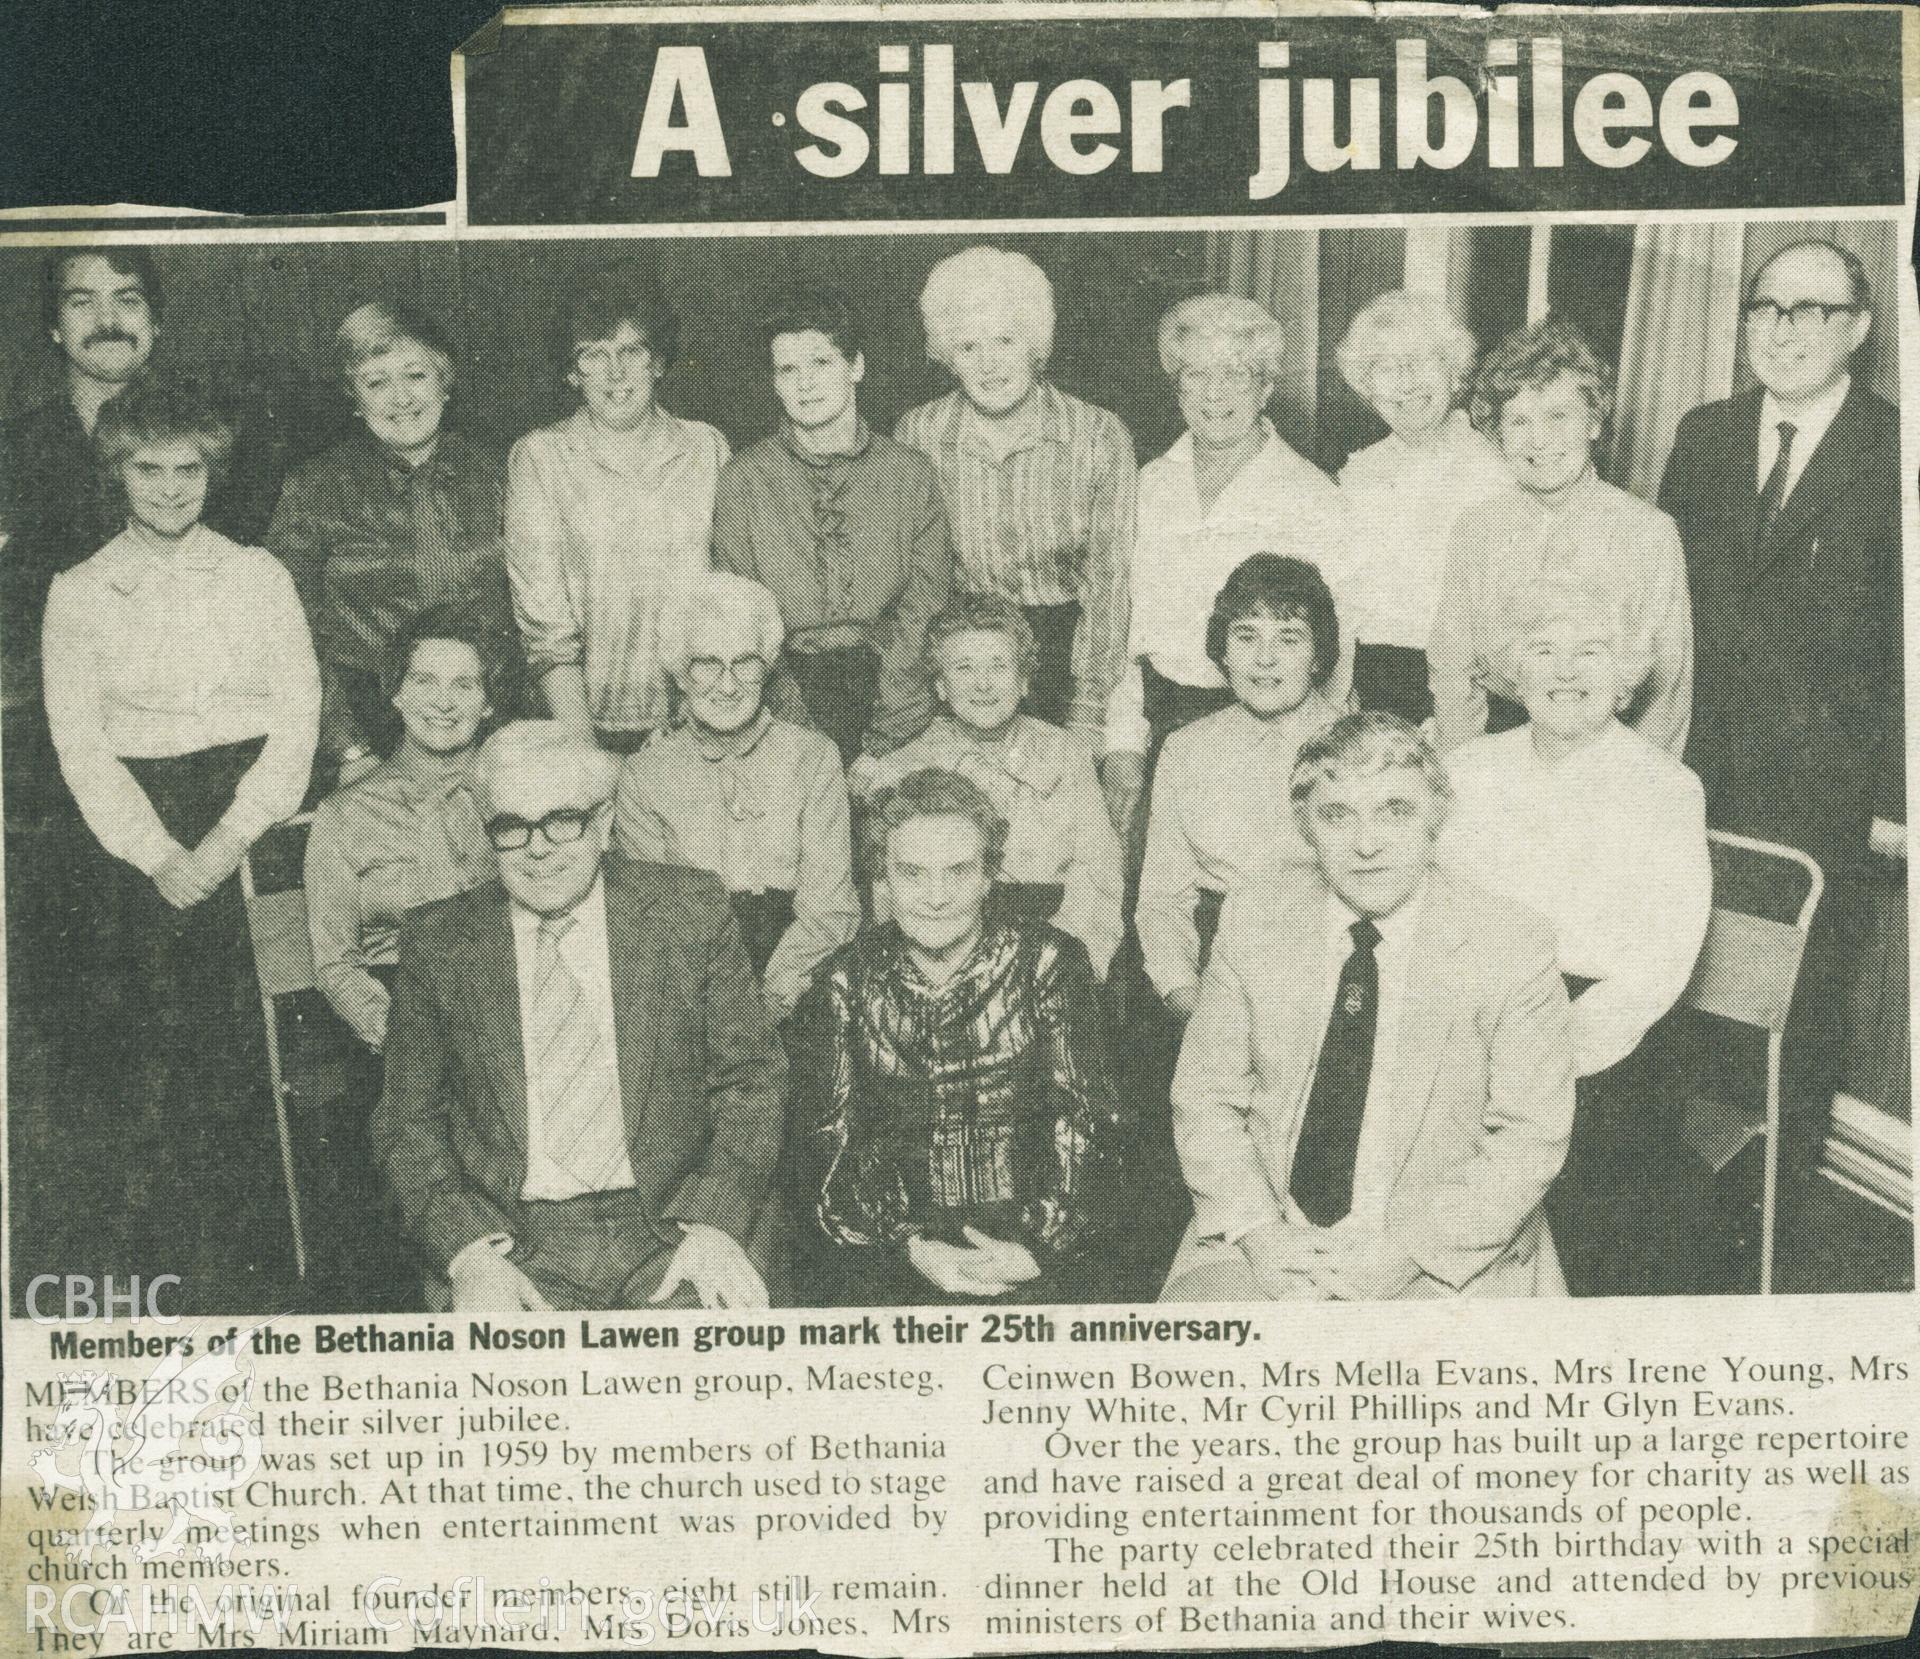 Newspaper cutting of an article celebrating the Silver Jubilee of Bethania Noson Lawen, 1984. Donated to the RCAHMW by Enyd Carroll as part of the Digital Dissent Project.